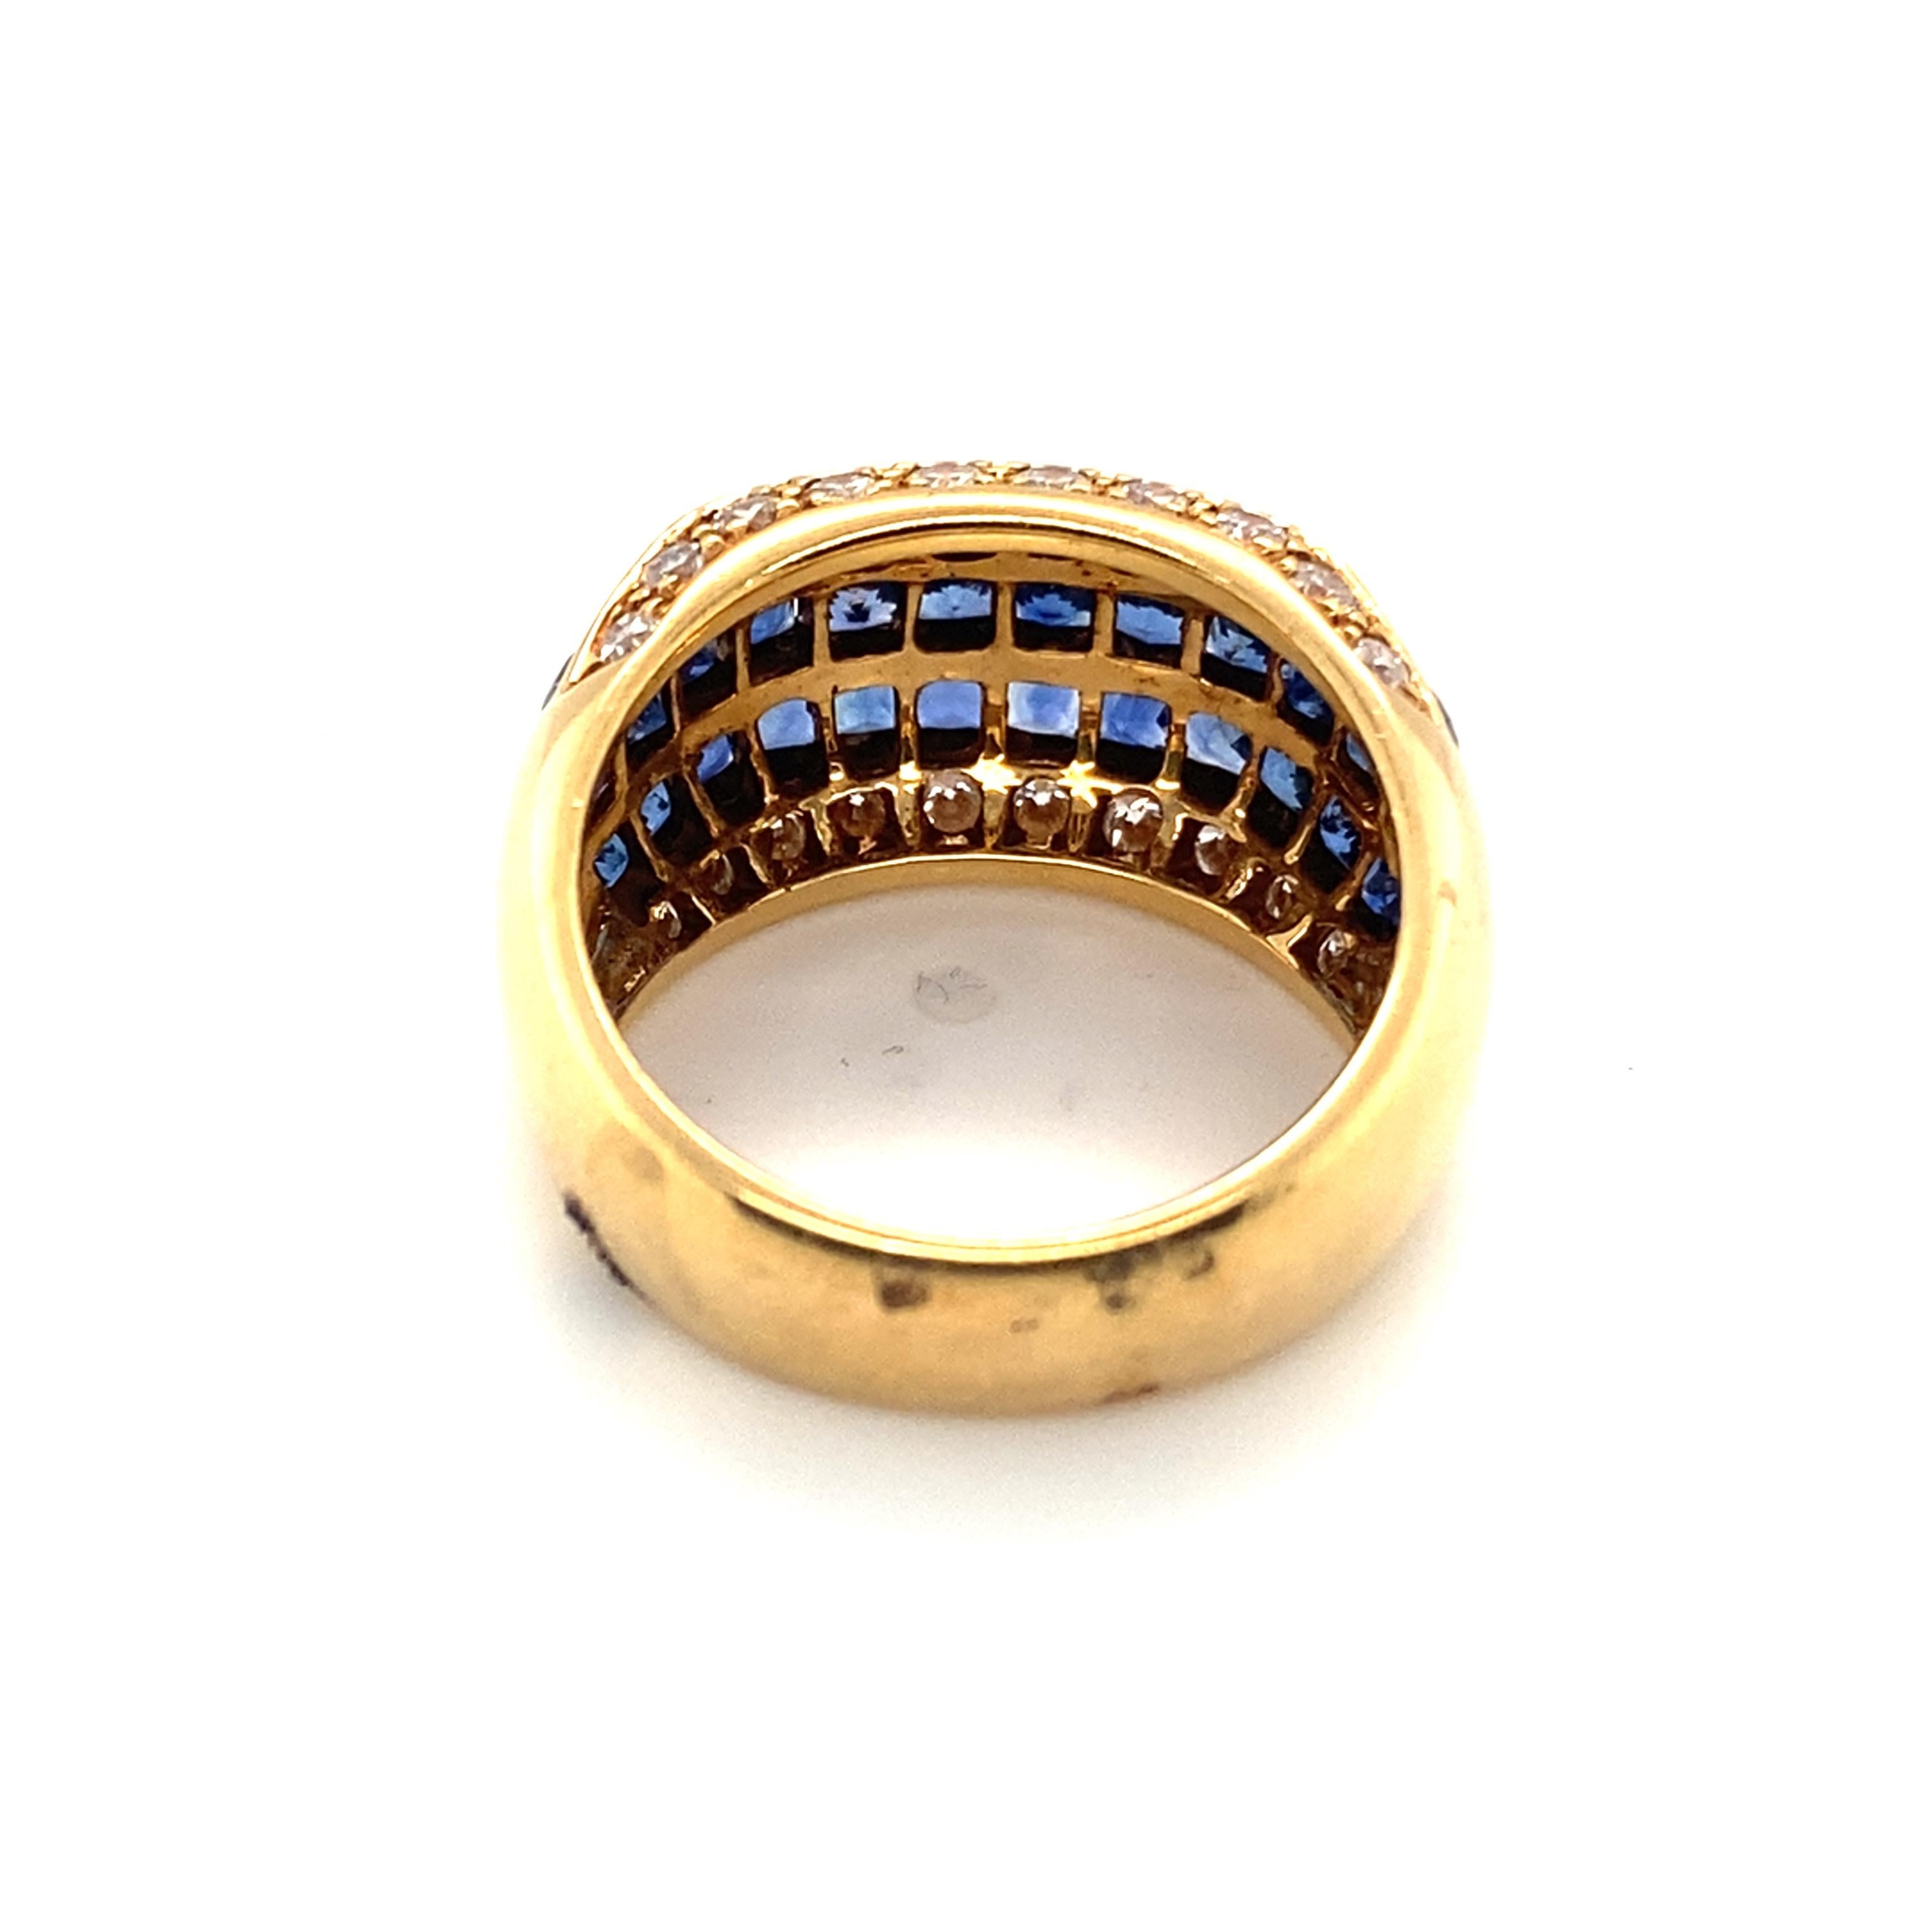 Women's or Men's 1990s 2.40 Carat Sapphire and Diamond Ring in 18 Karat Yellow Gold For Sale